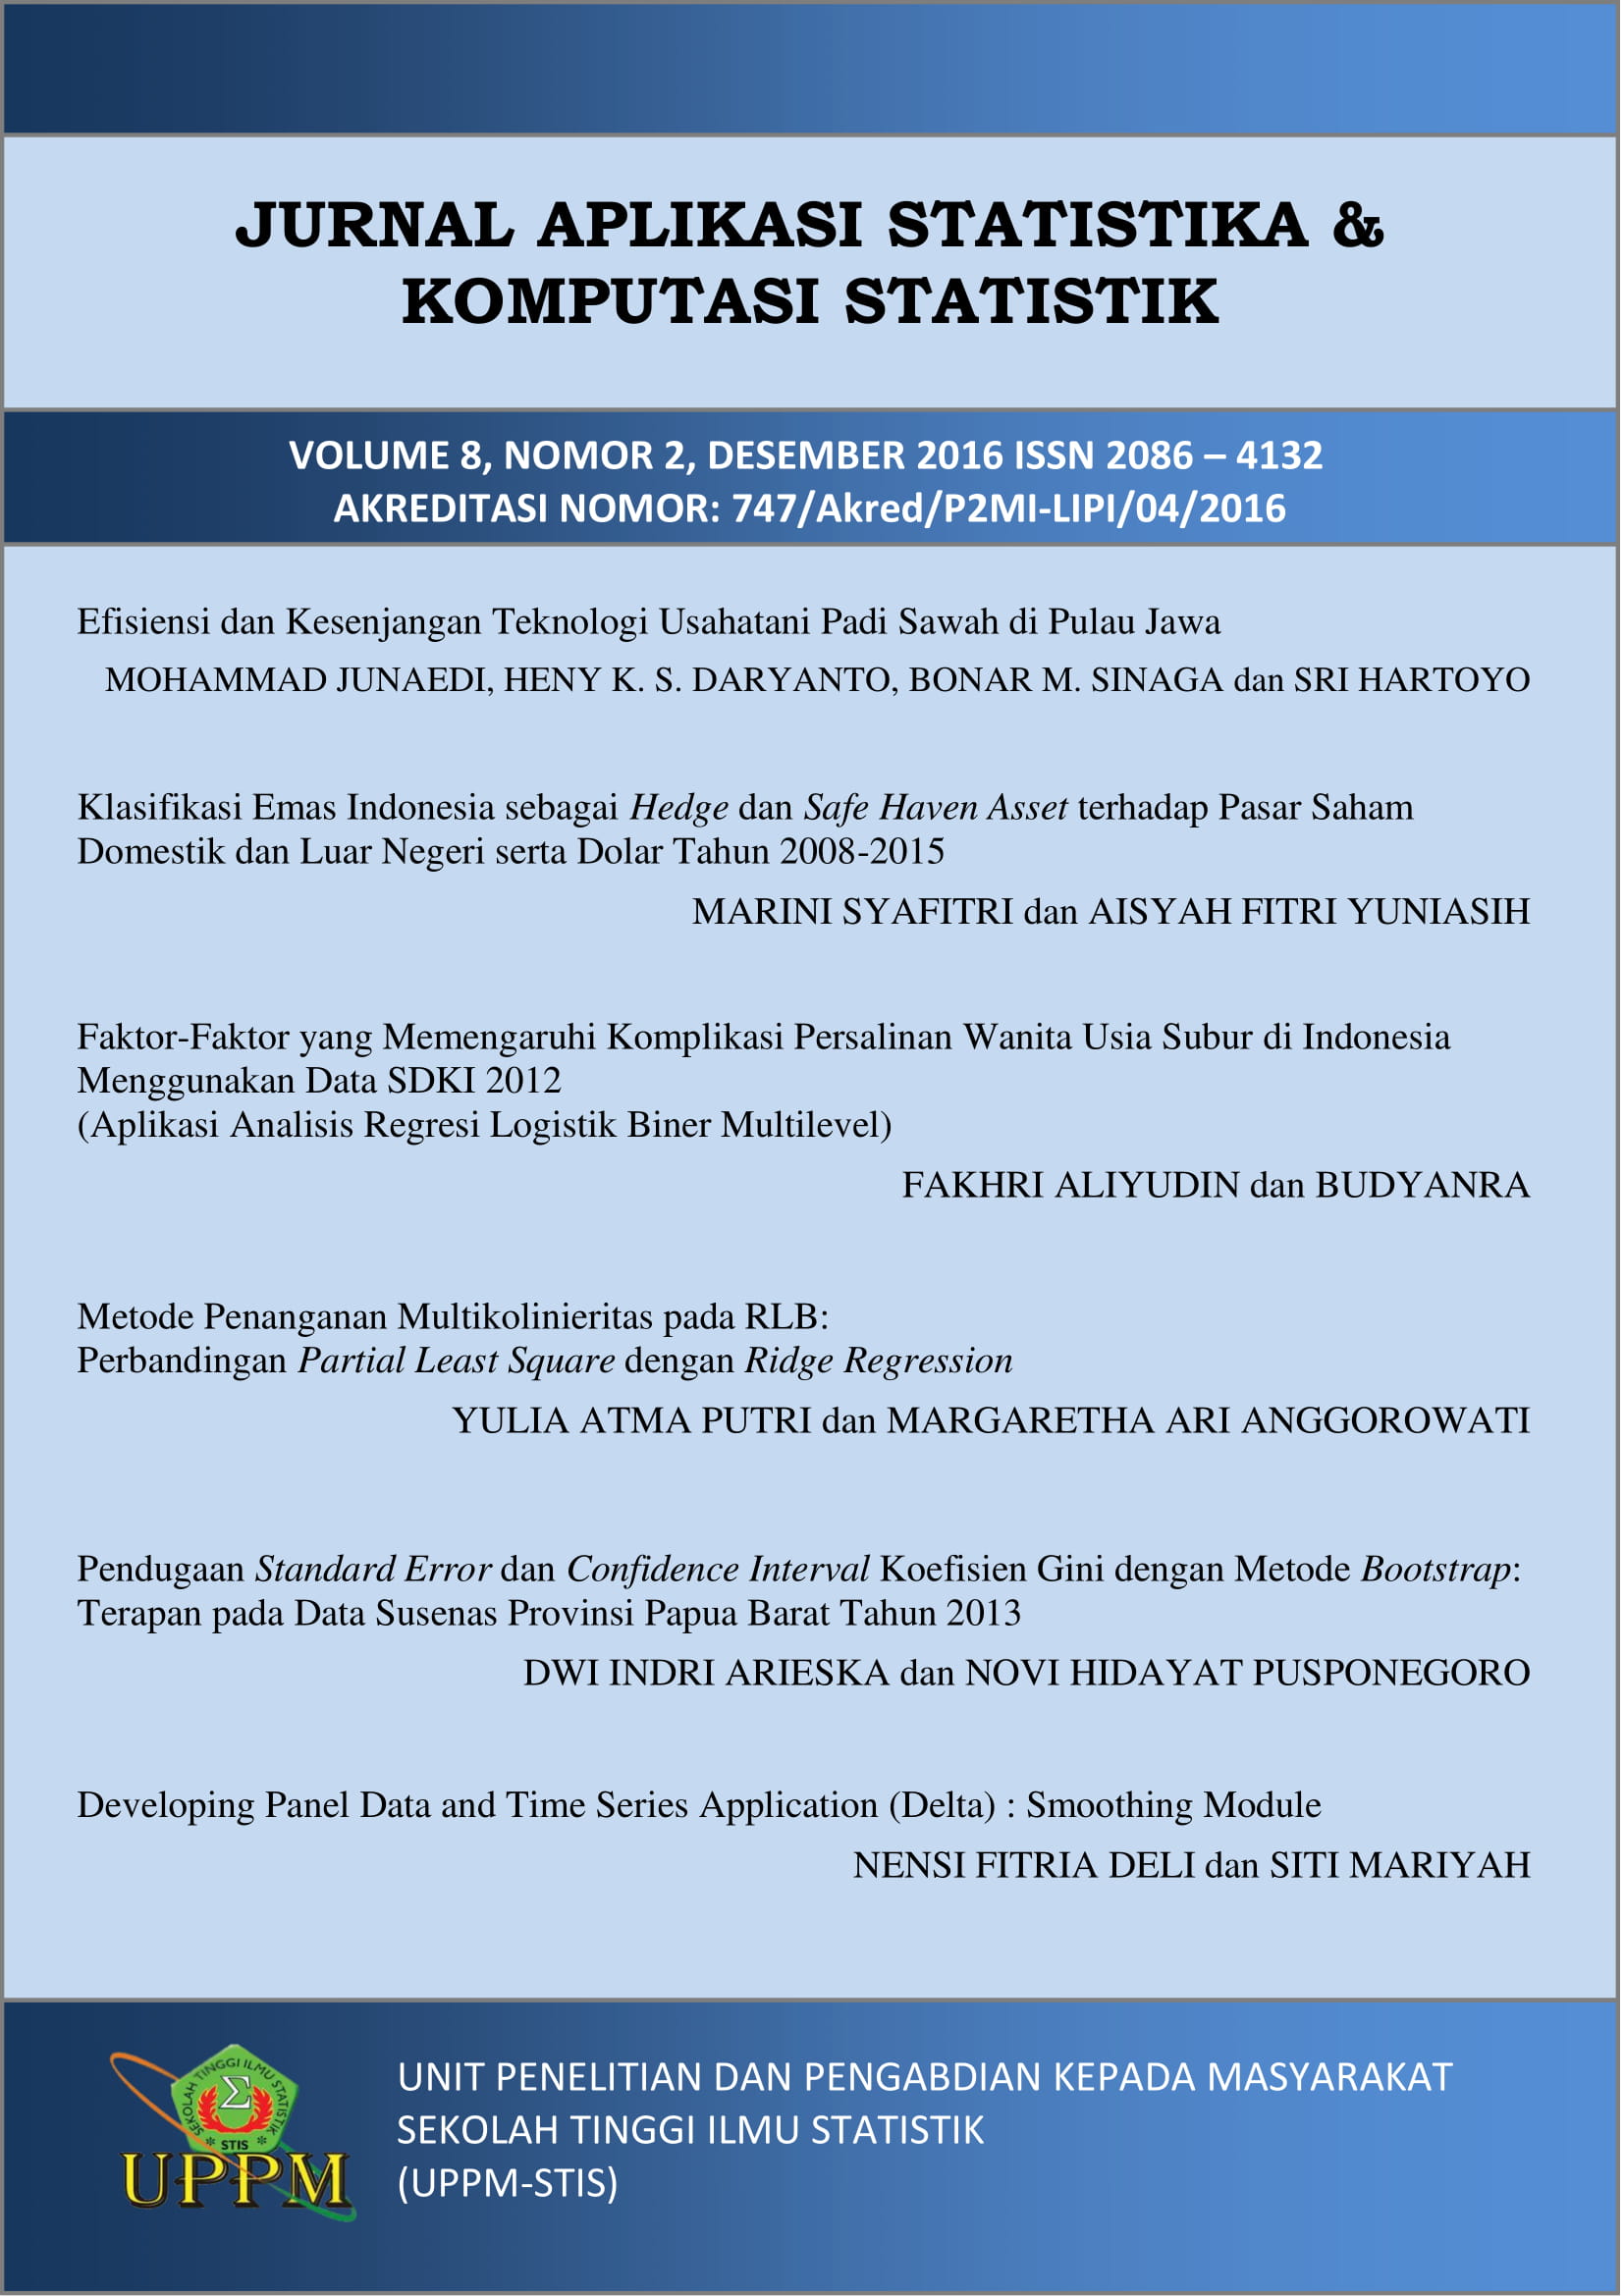 					View Vol. 8 No. 2 (2016): Journal of Statistical Application and Computational Statistics
				